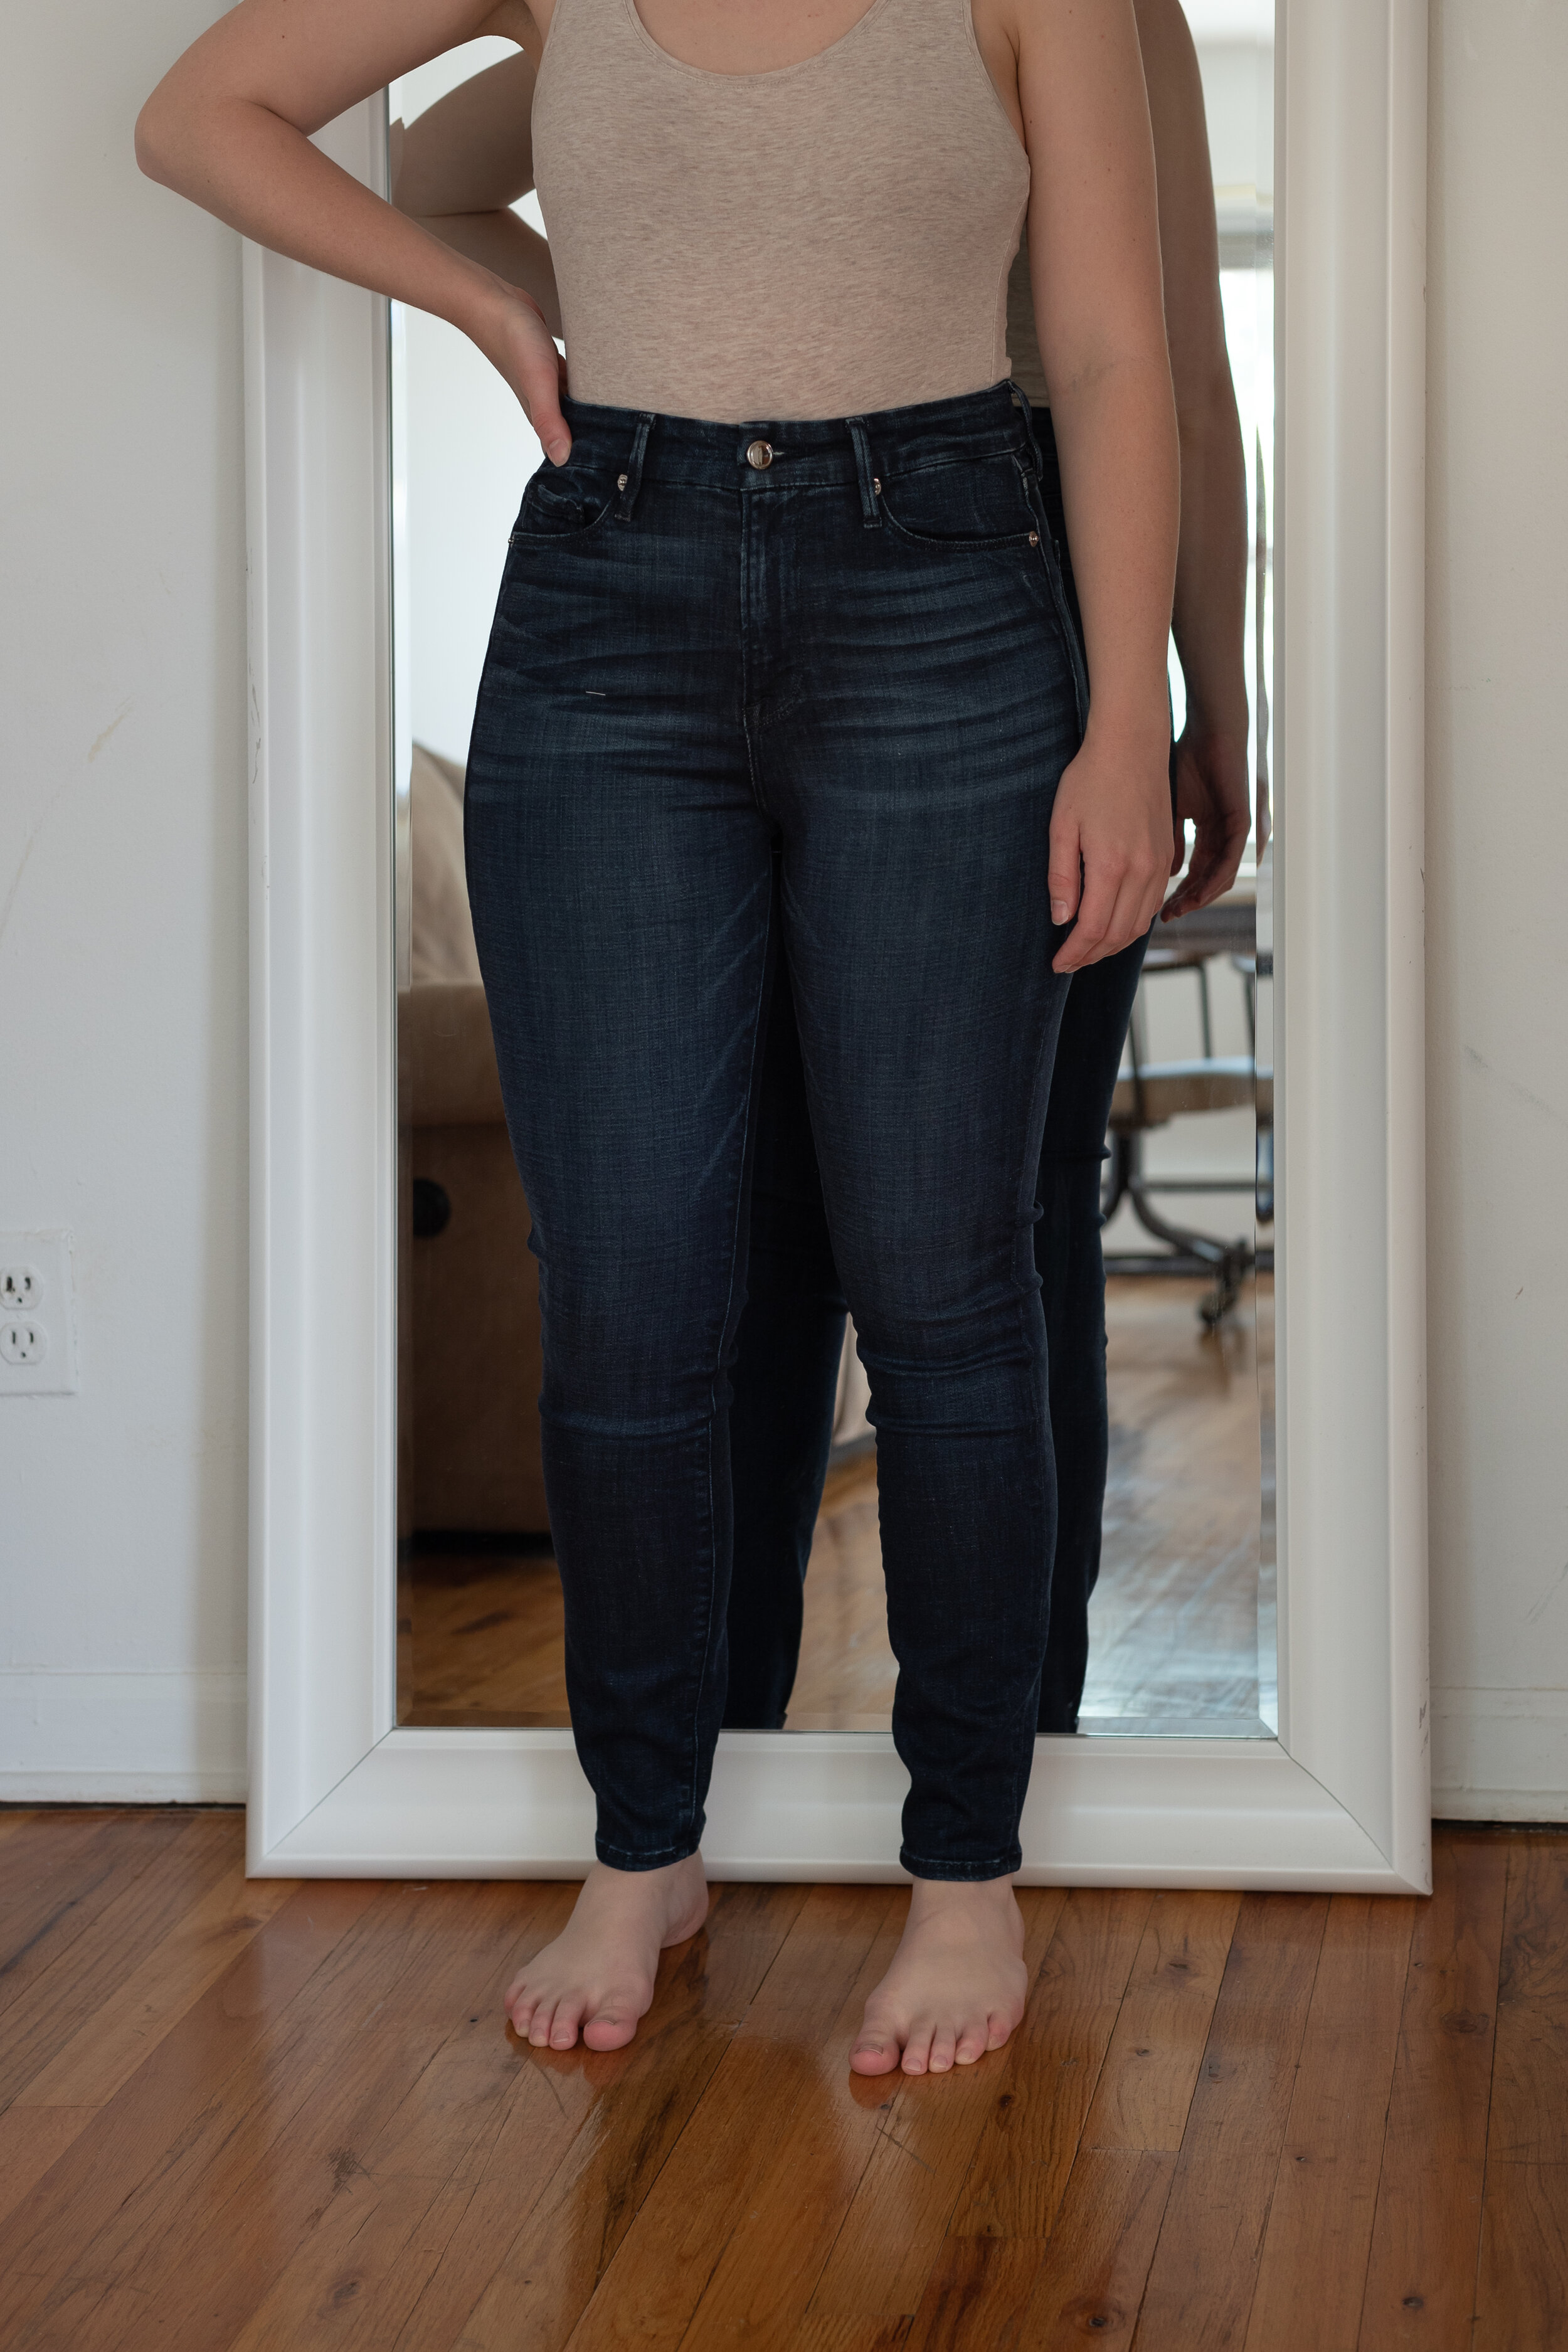 ARE GOOD AMERICAN JEANS REALLY WAIST GAP FREE? — The Petite Pear Project